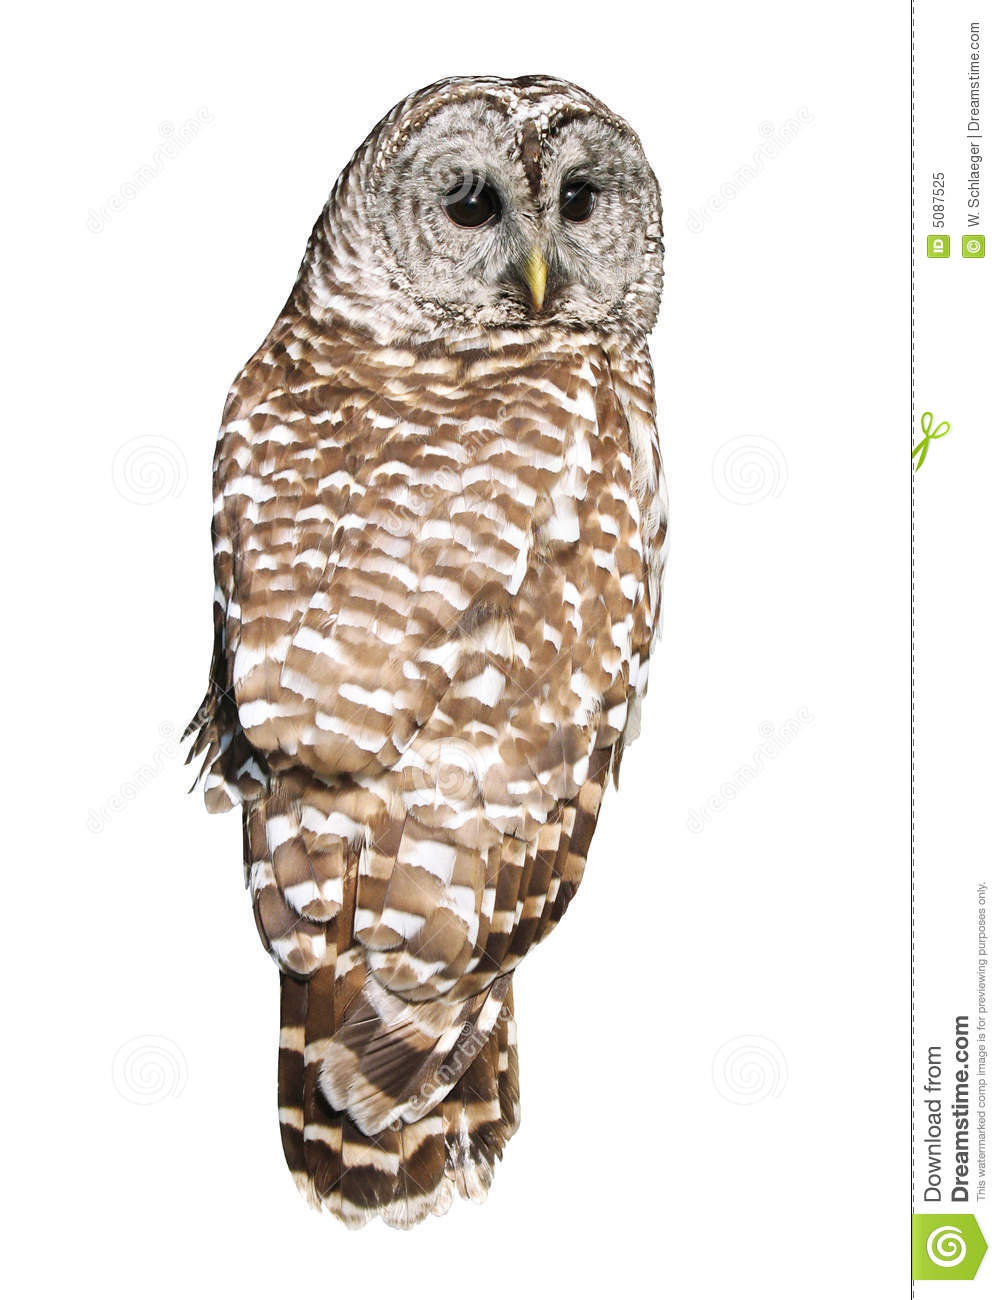 Barred Owl clipart #4, Download drawings